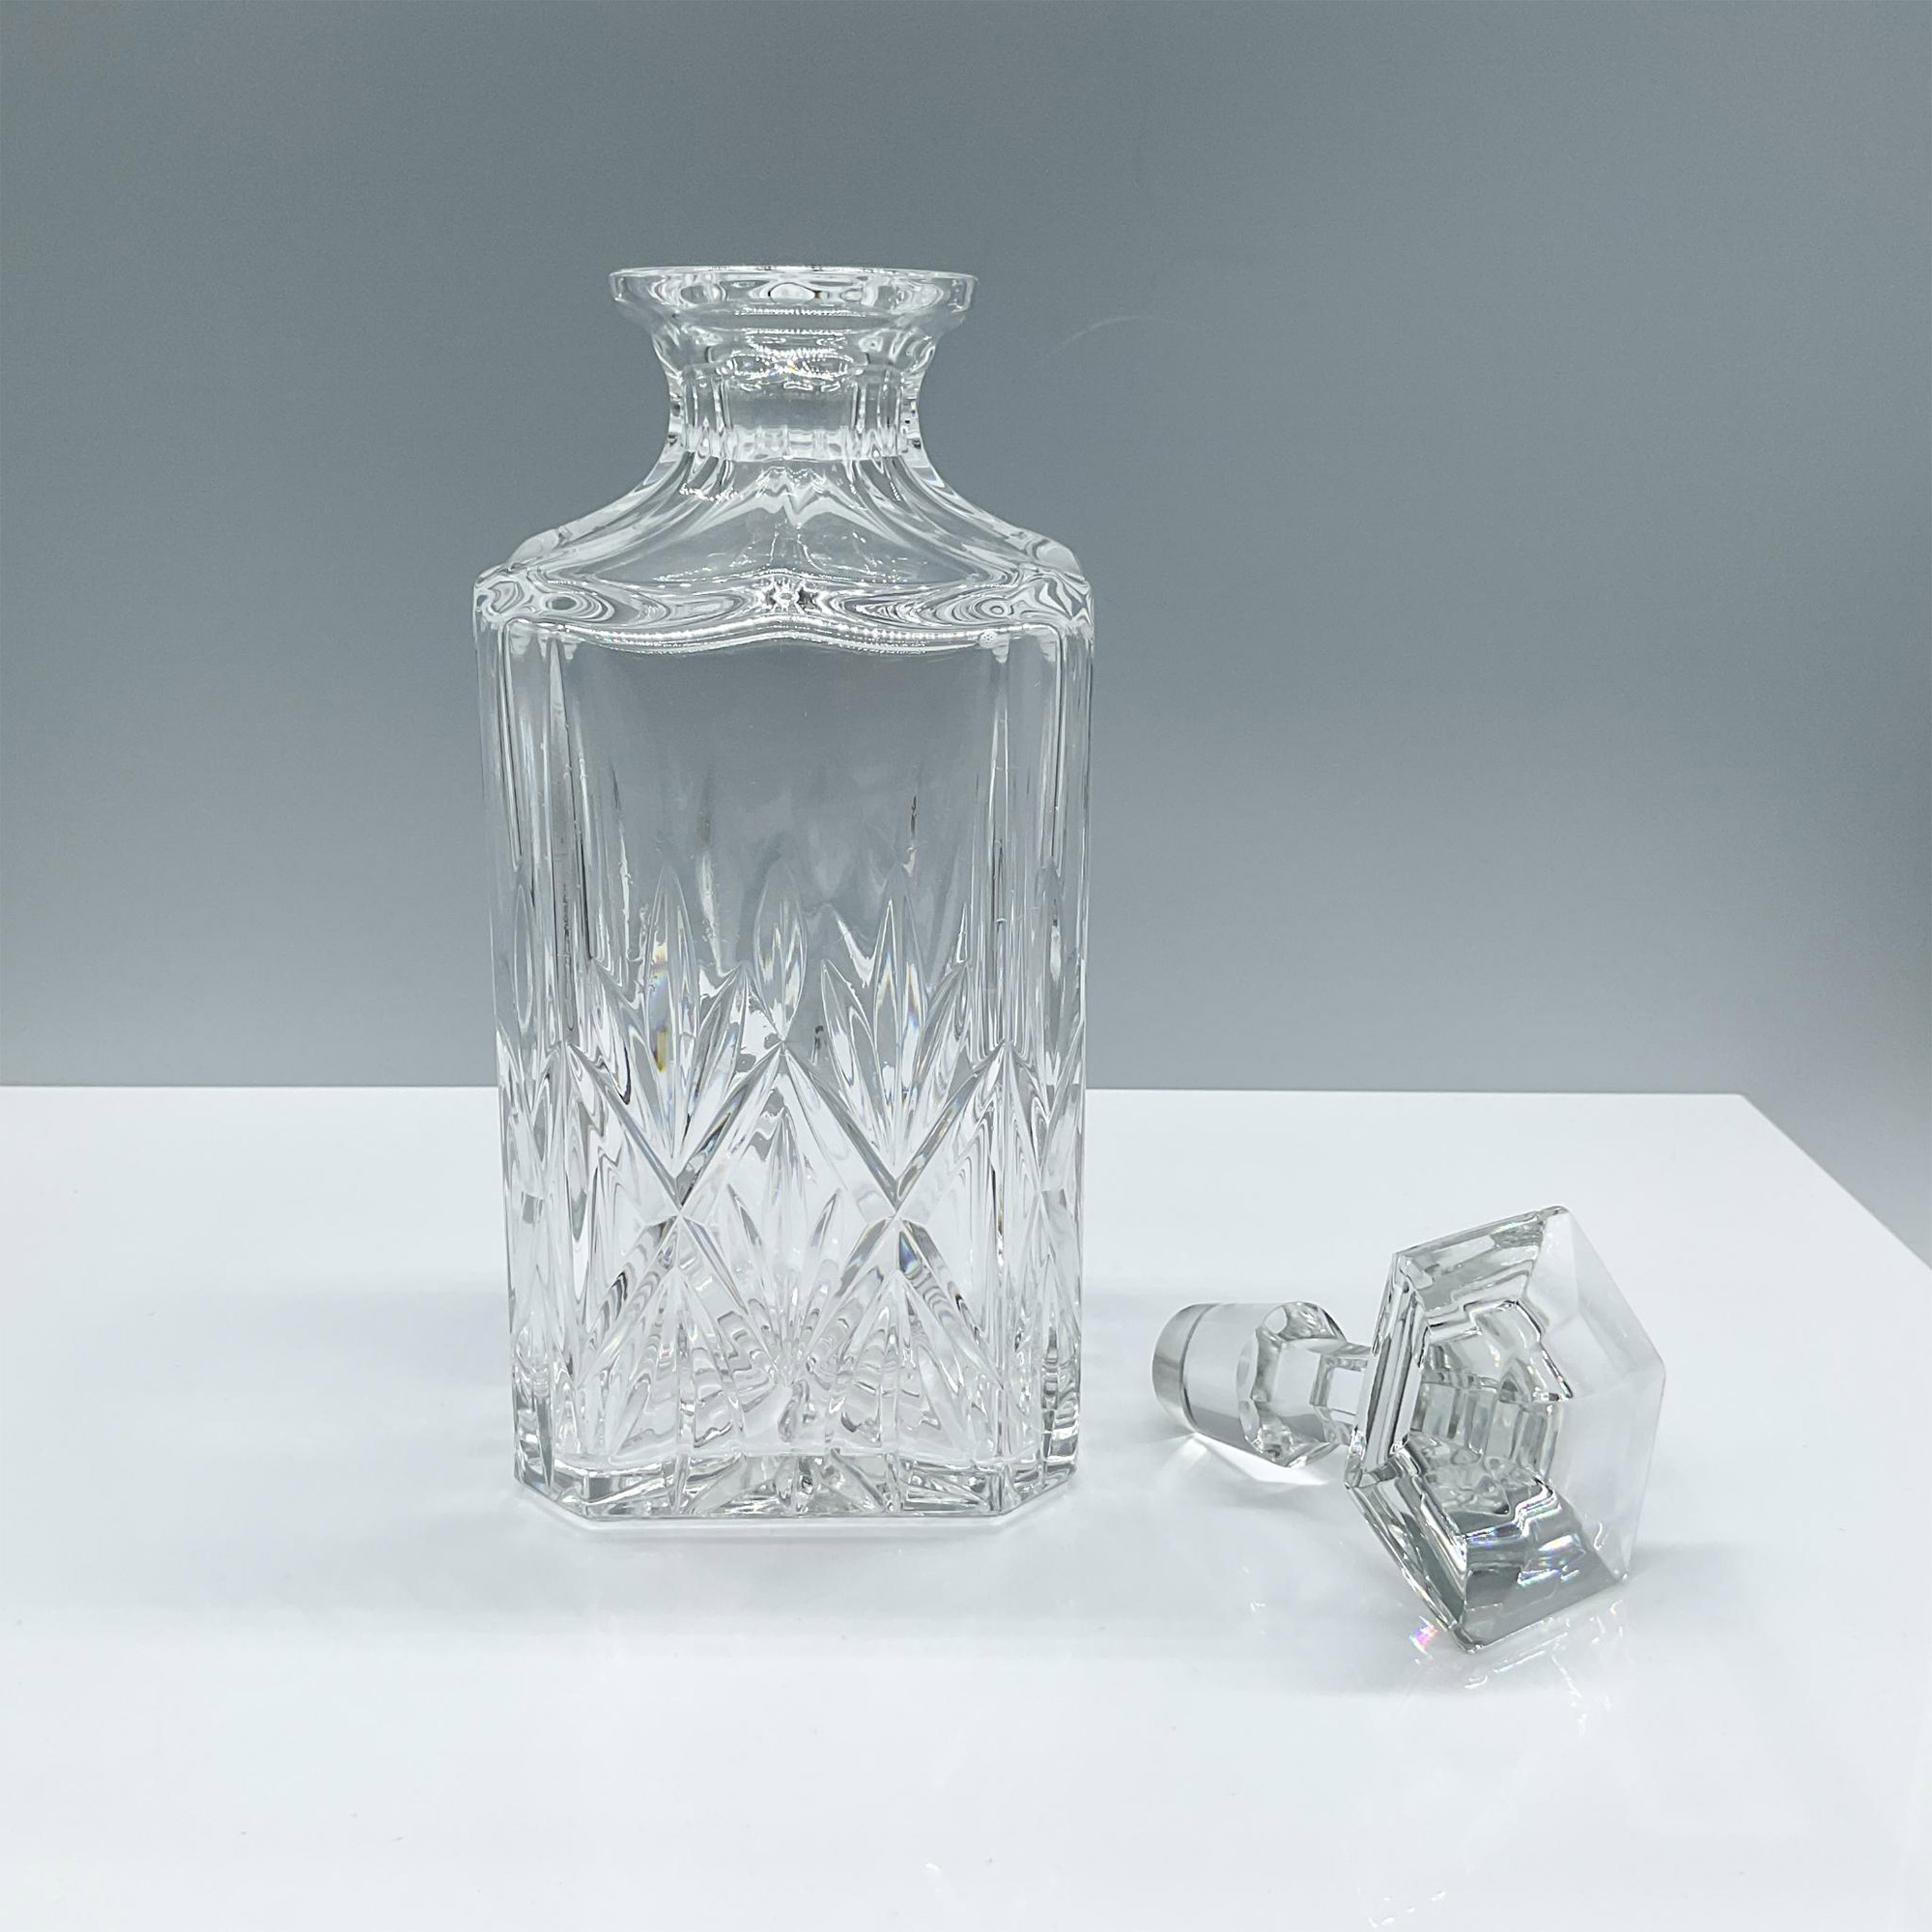 Tiffany & Co Crystal Whiskey Decanter with Stopper - Image 2 of 4